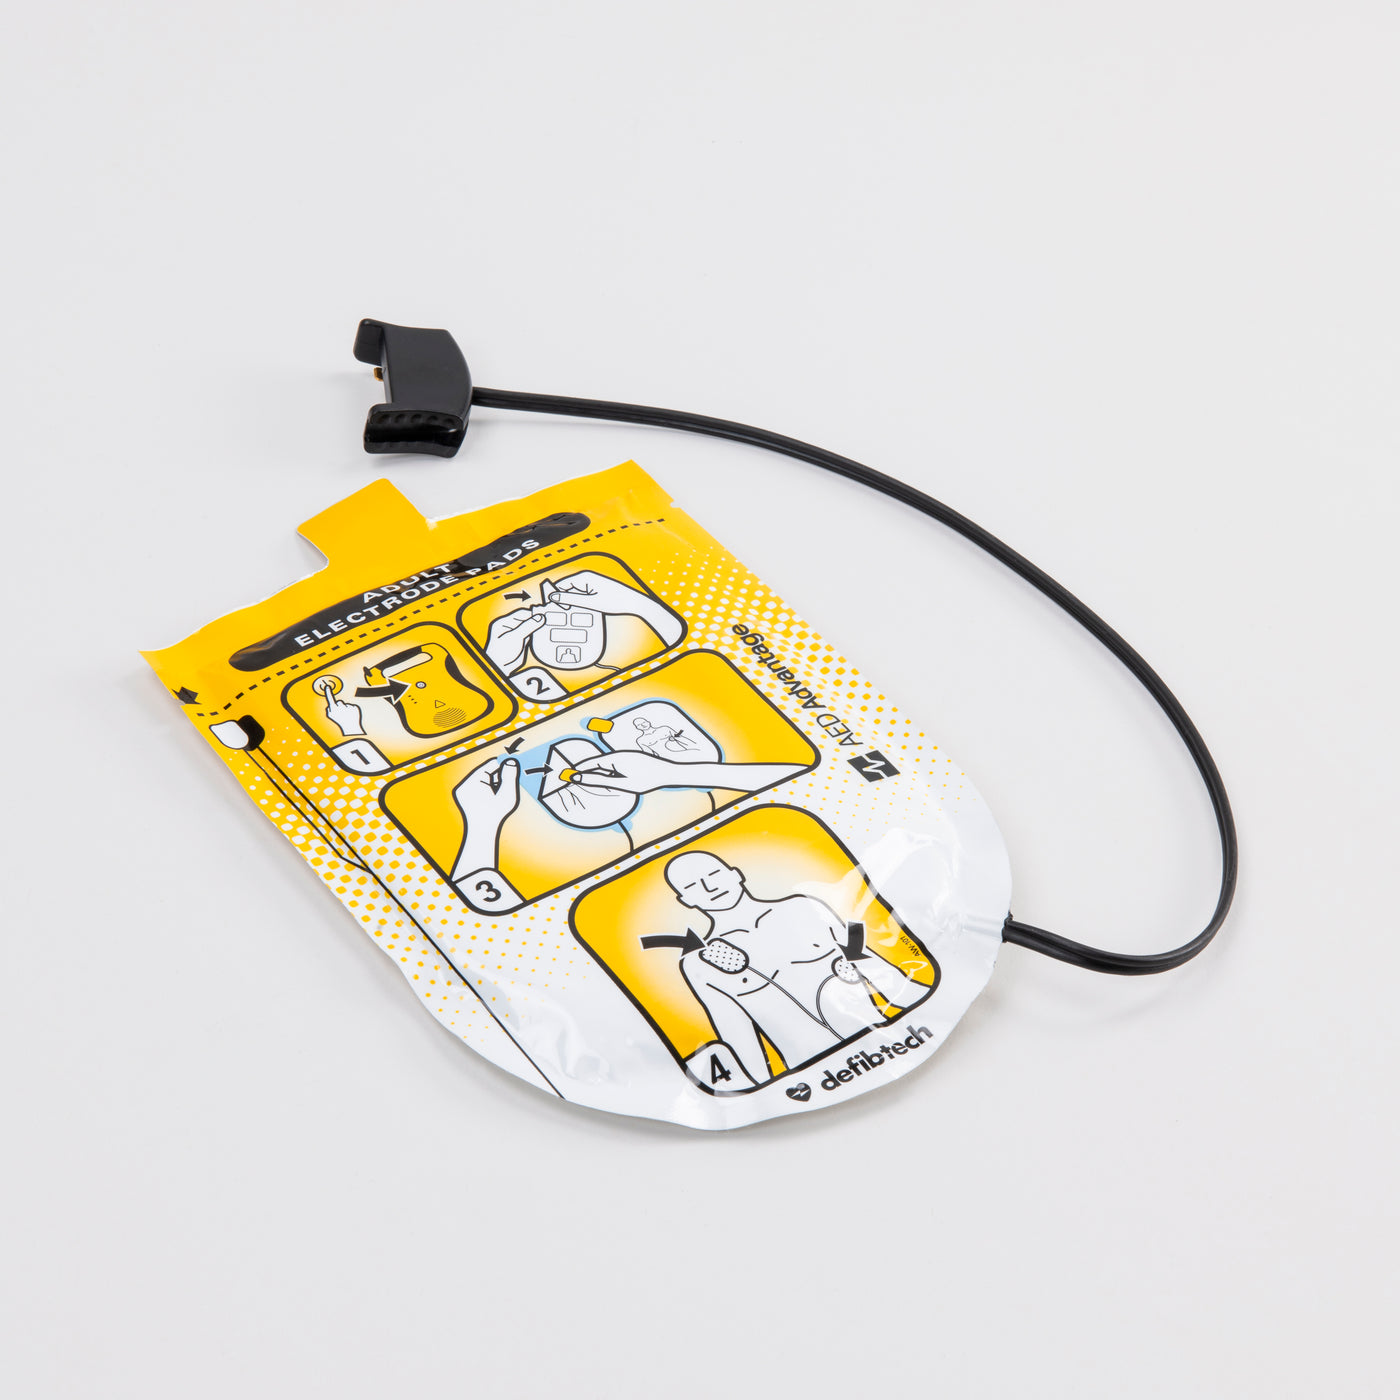 A set of adult Defibtech Lifeline electrodes encased in their yellow foil wrap with a black connector cord